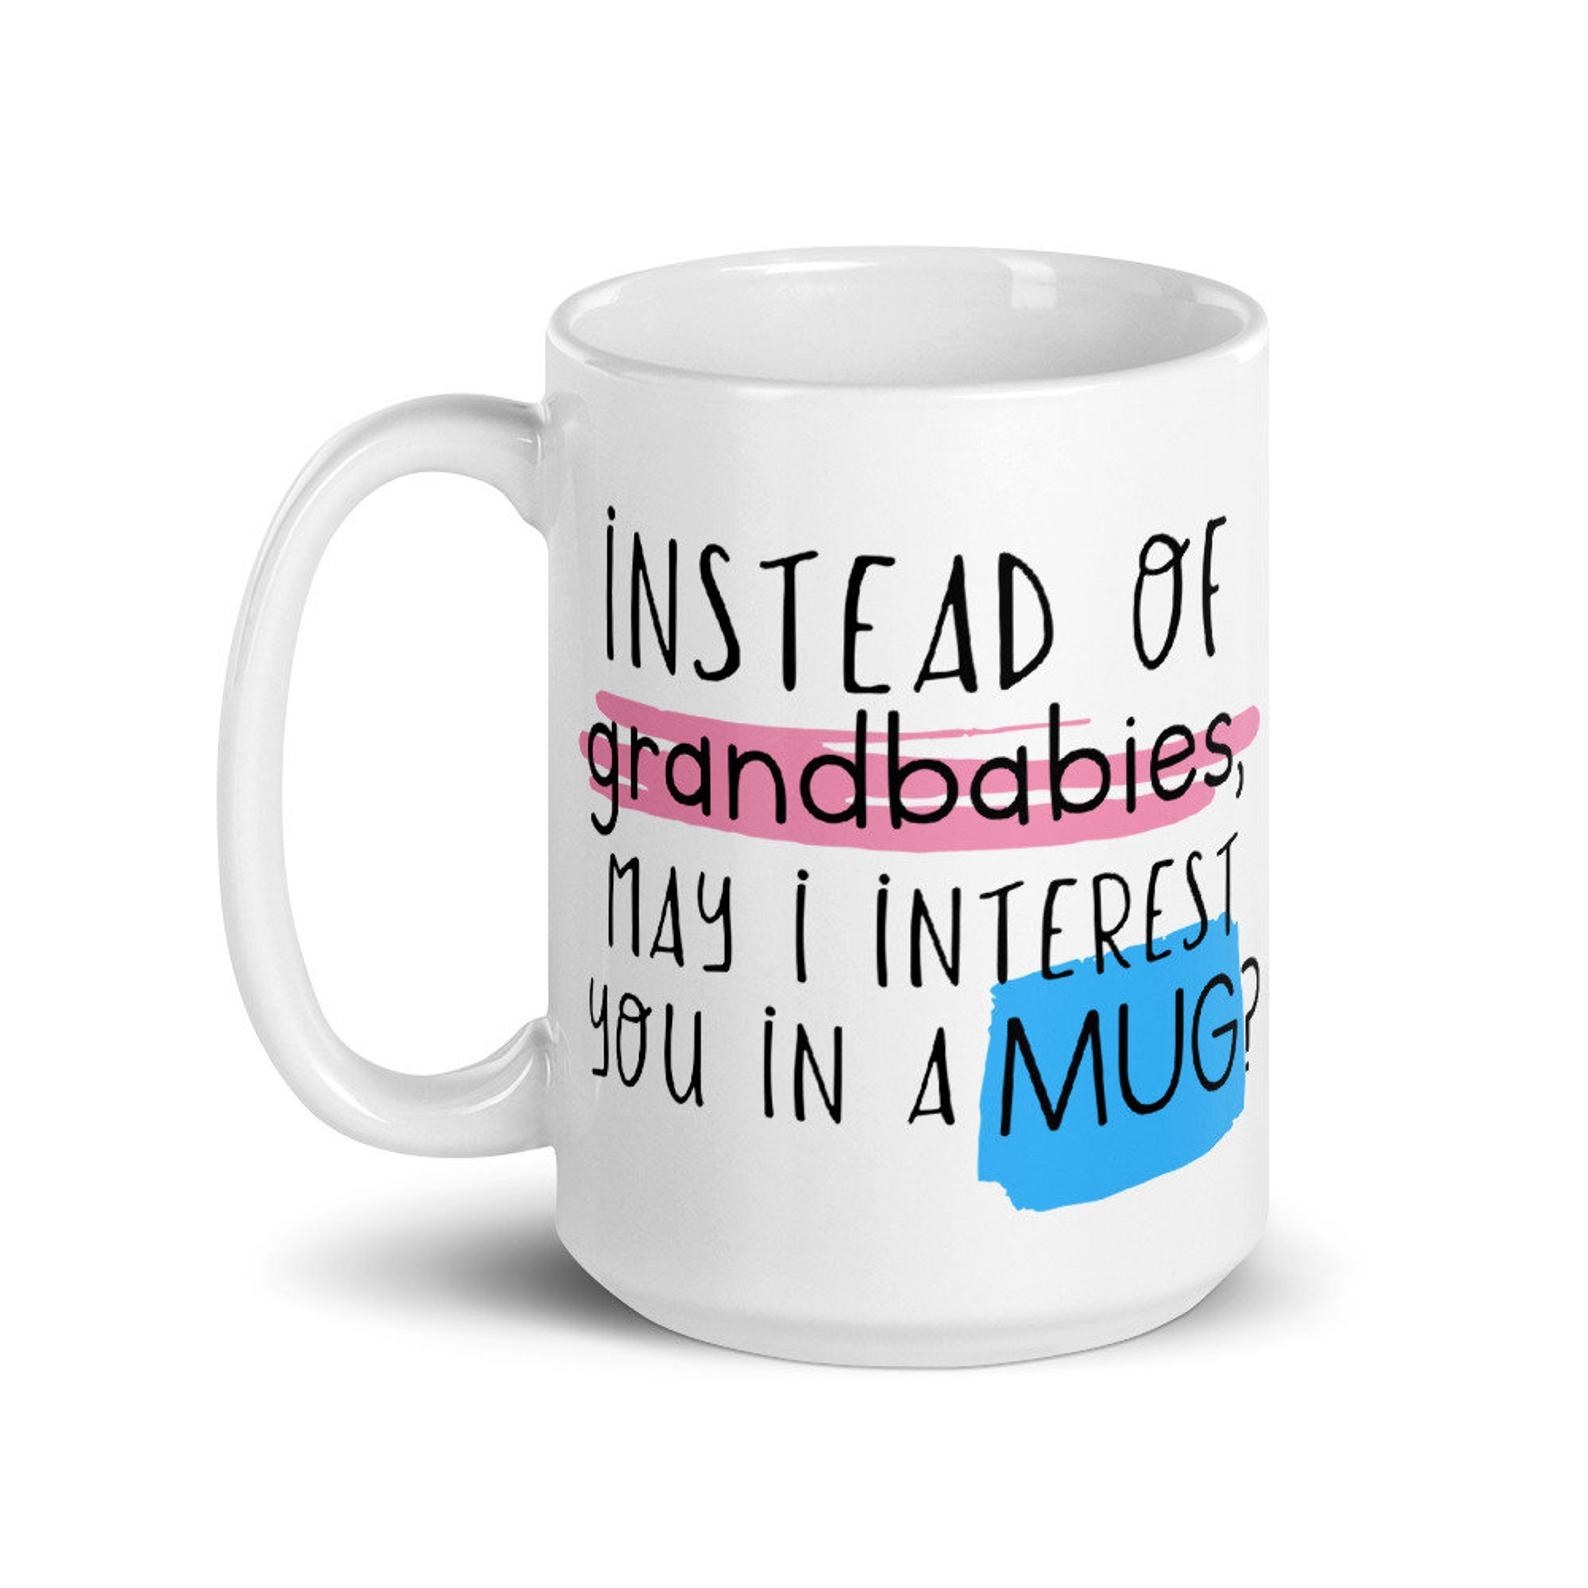 a white mug that says &quot;instead of grandbabies may I interest you in a mug?